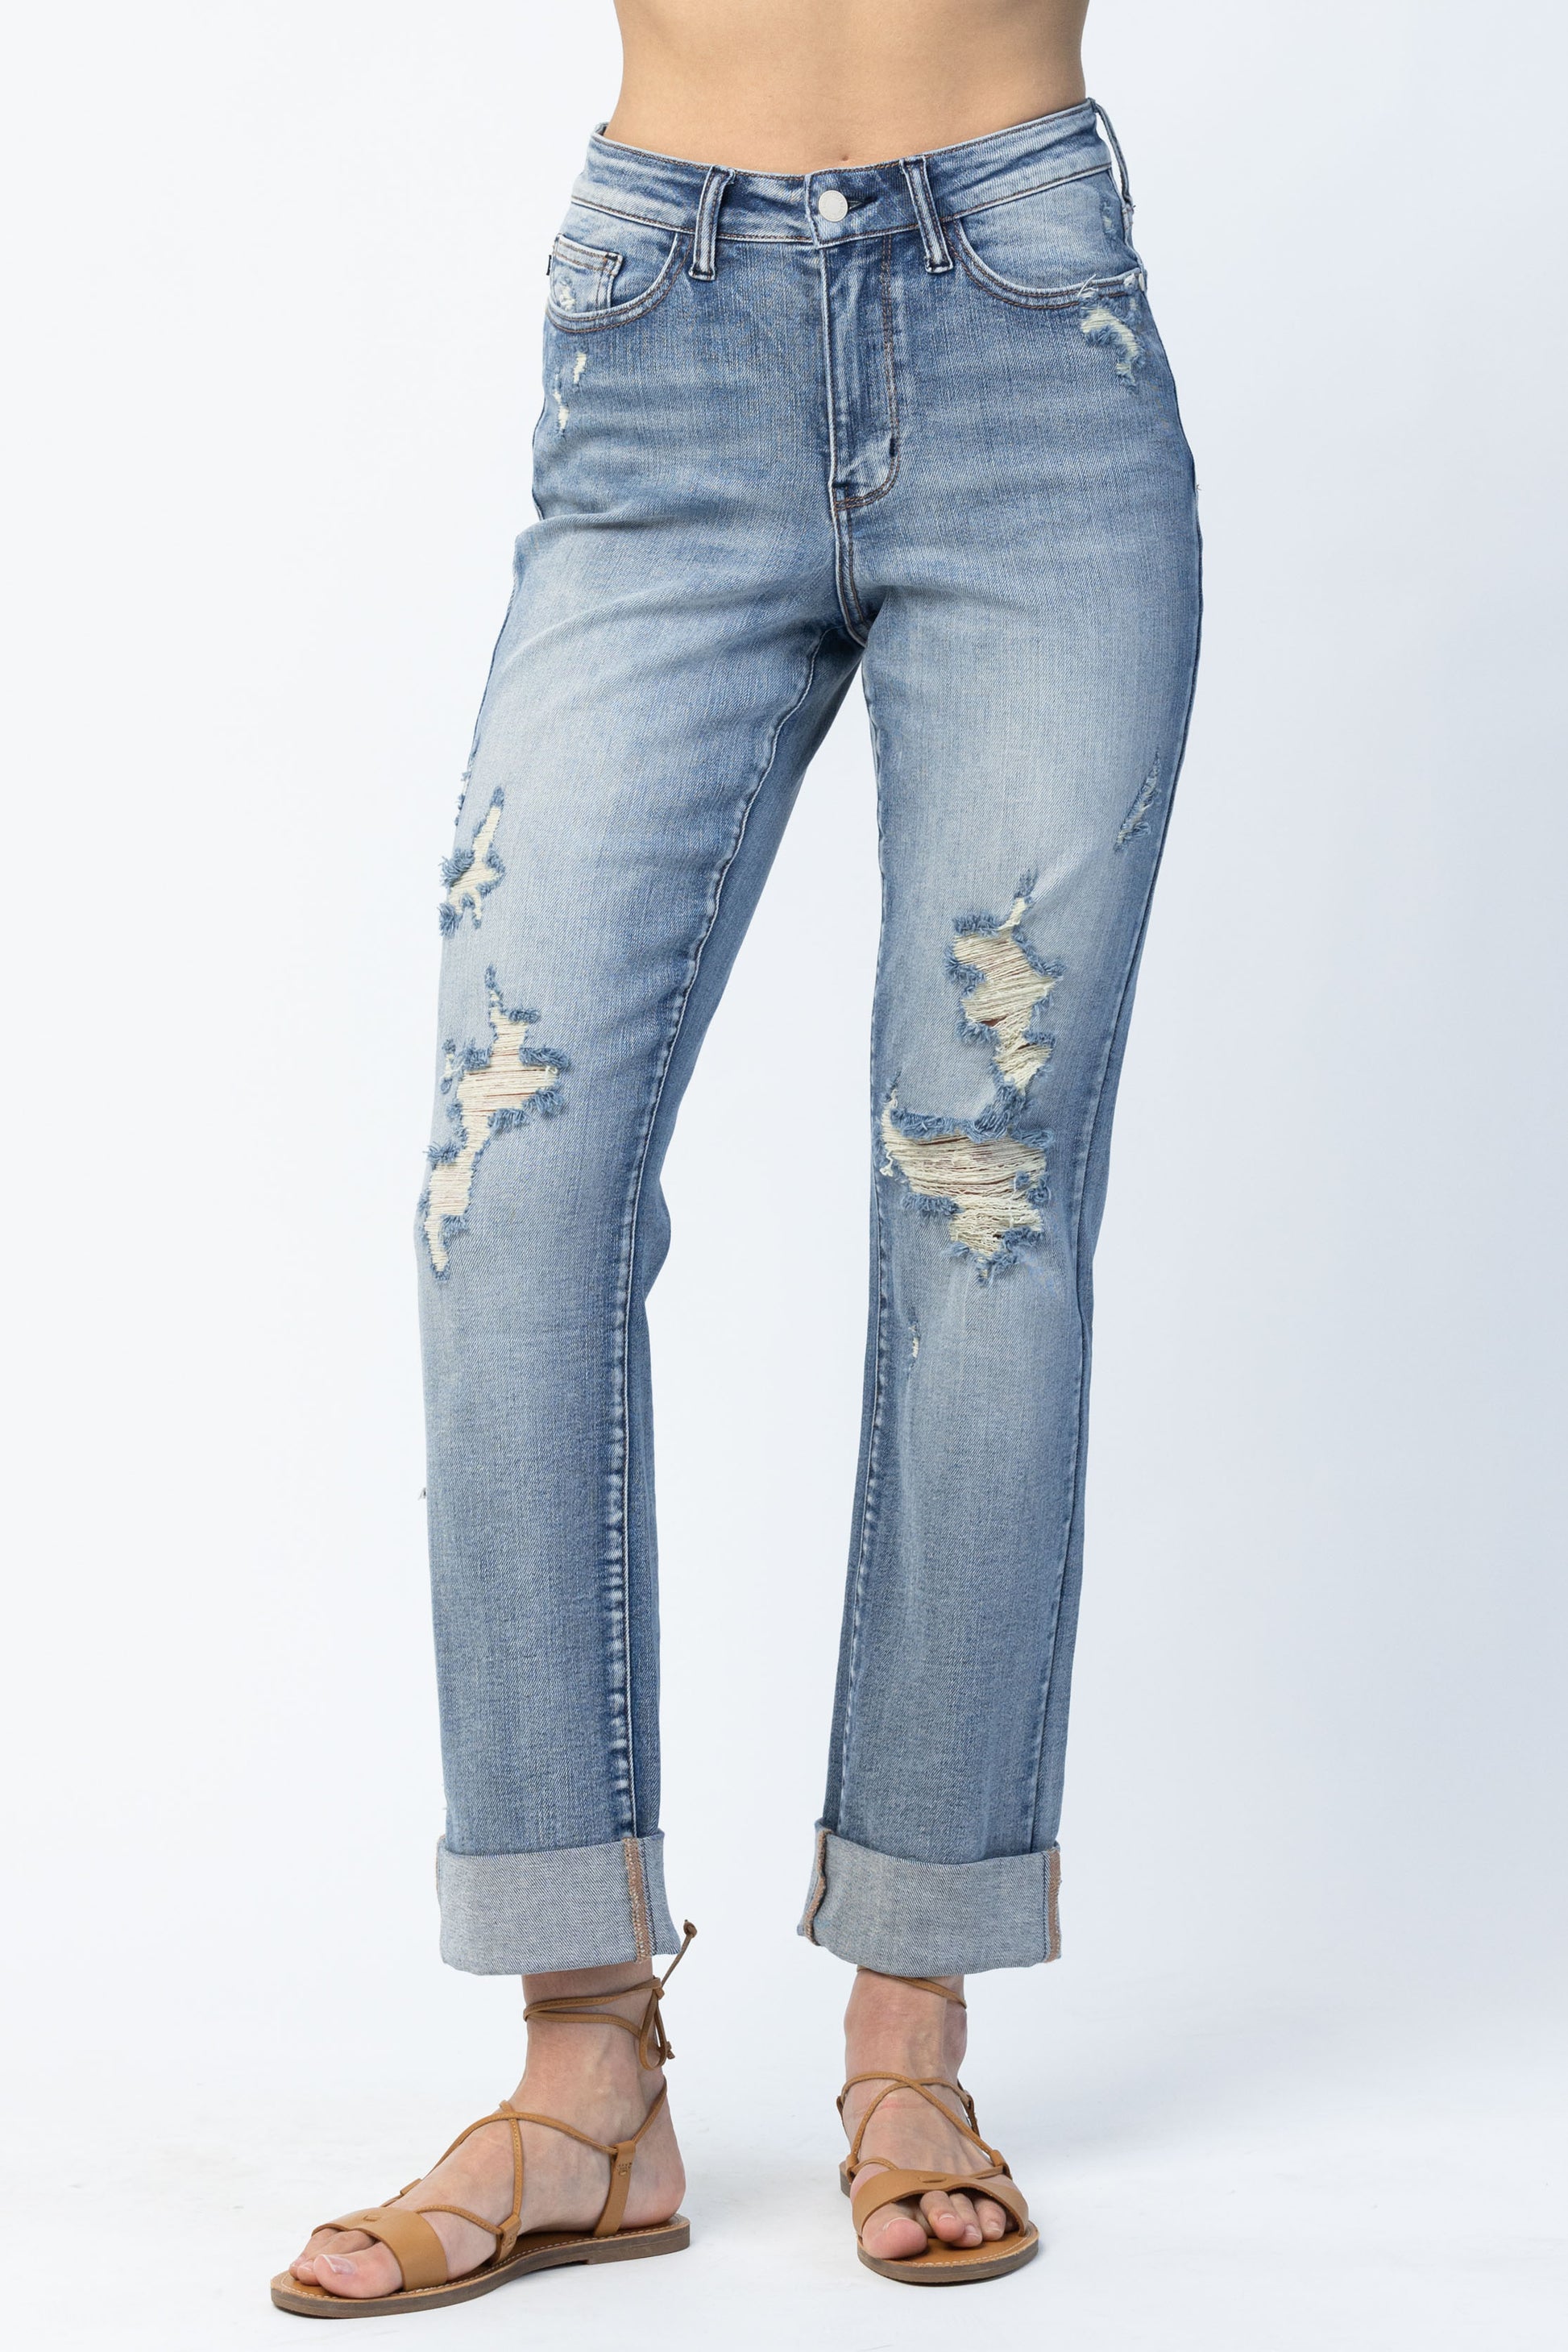 Distressed Jogger Jean by HAMMILL and CO – Blue Butterfly Boutique